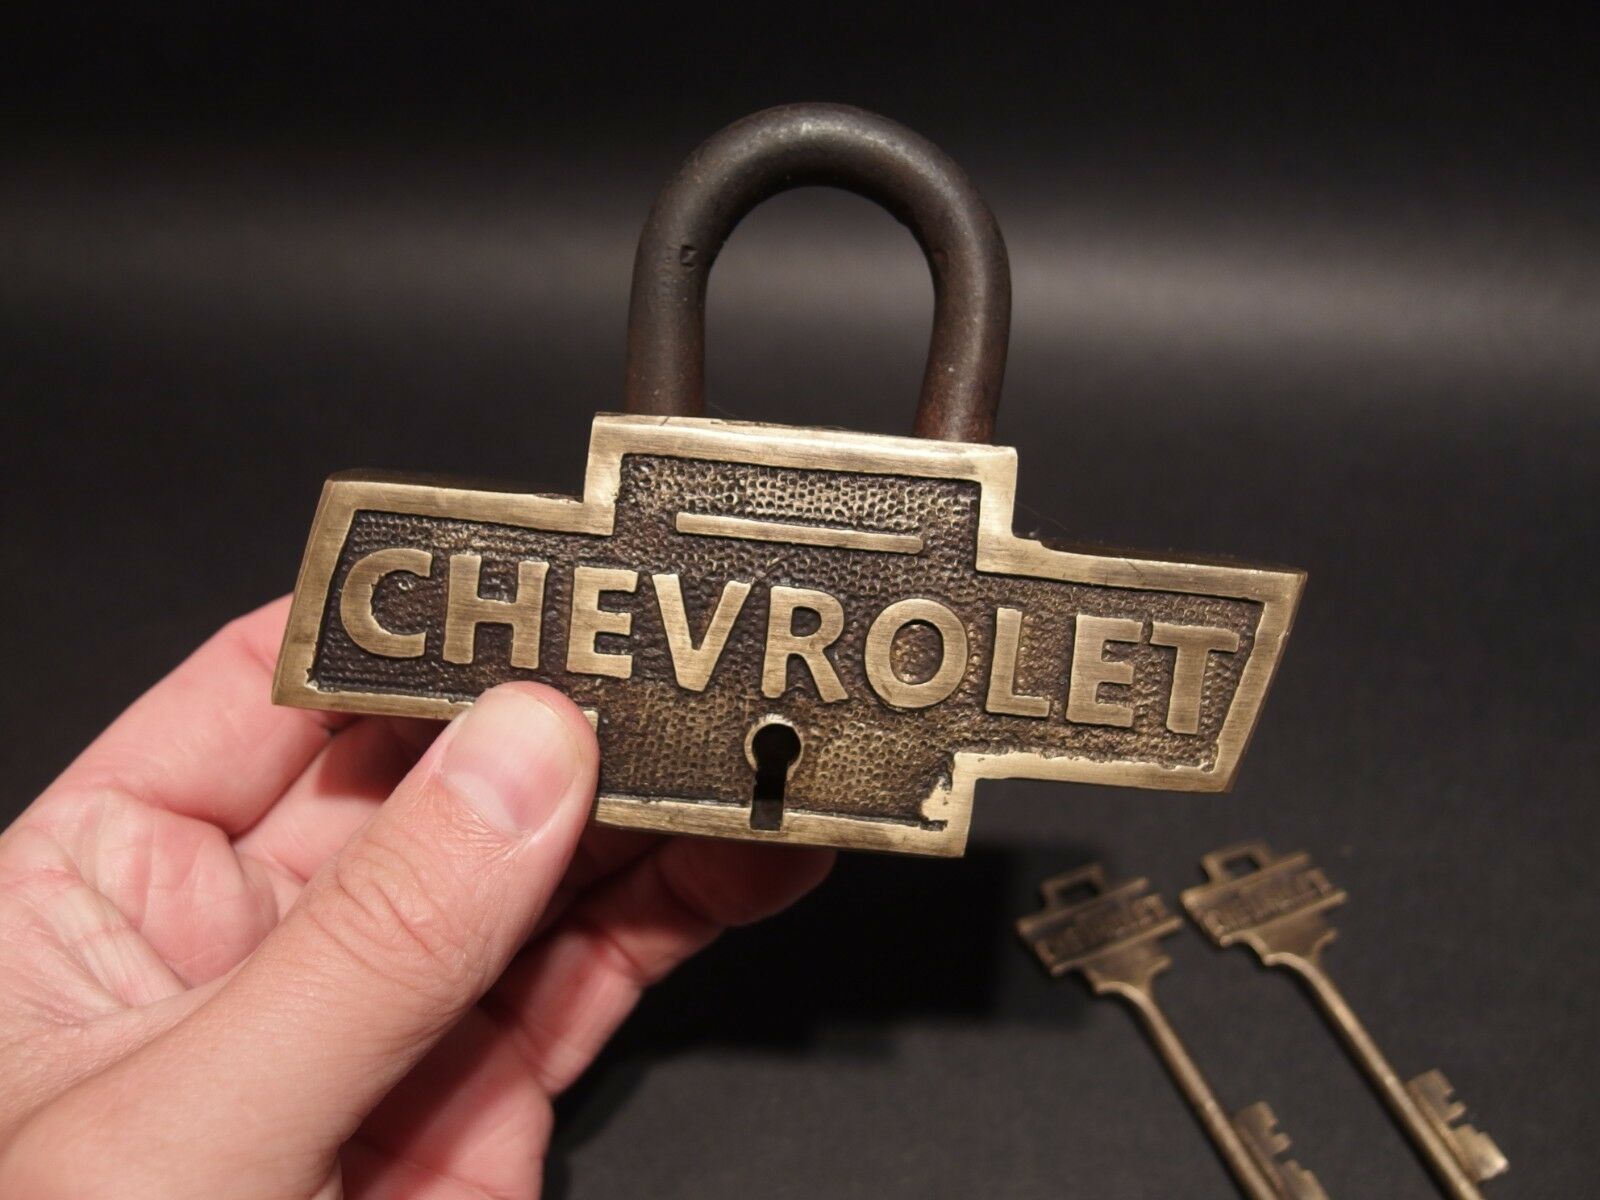 Antique Vintage Style Brass & Iron Trunk Chest Box Chevrolet Chevy Lock Padlock - Early Home Decor